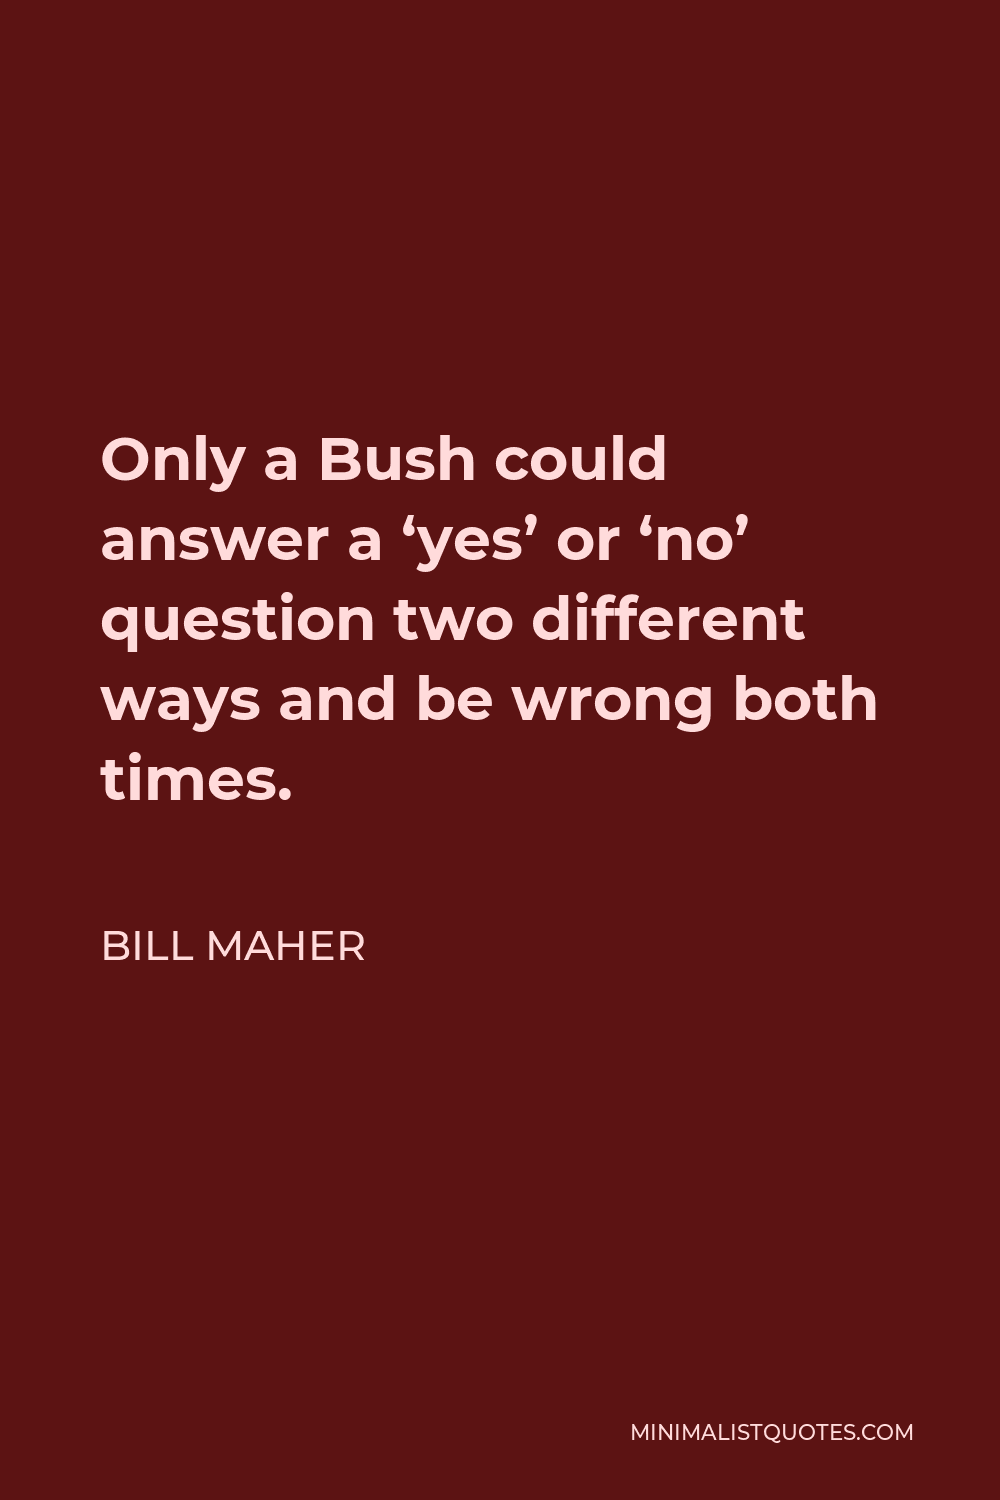 Bill Maher Quote - Only a Bush could answer a ‘yes’ or ‘no’ question two different ways and be wrong both times.